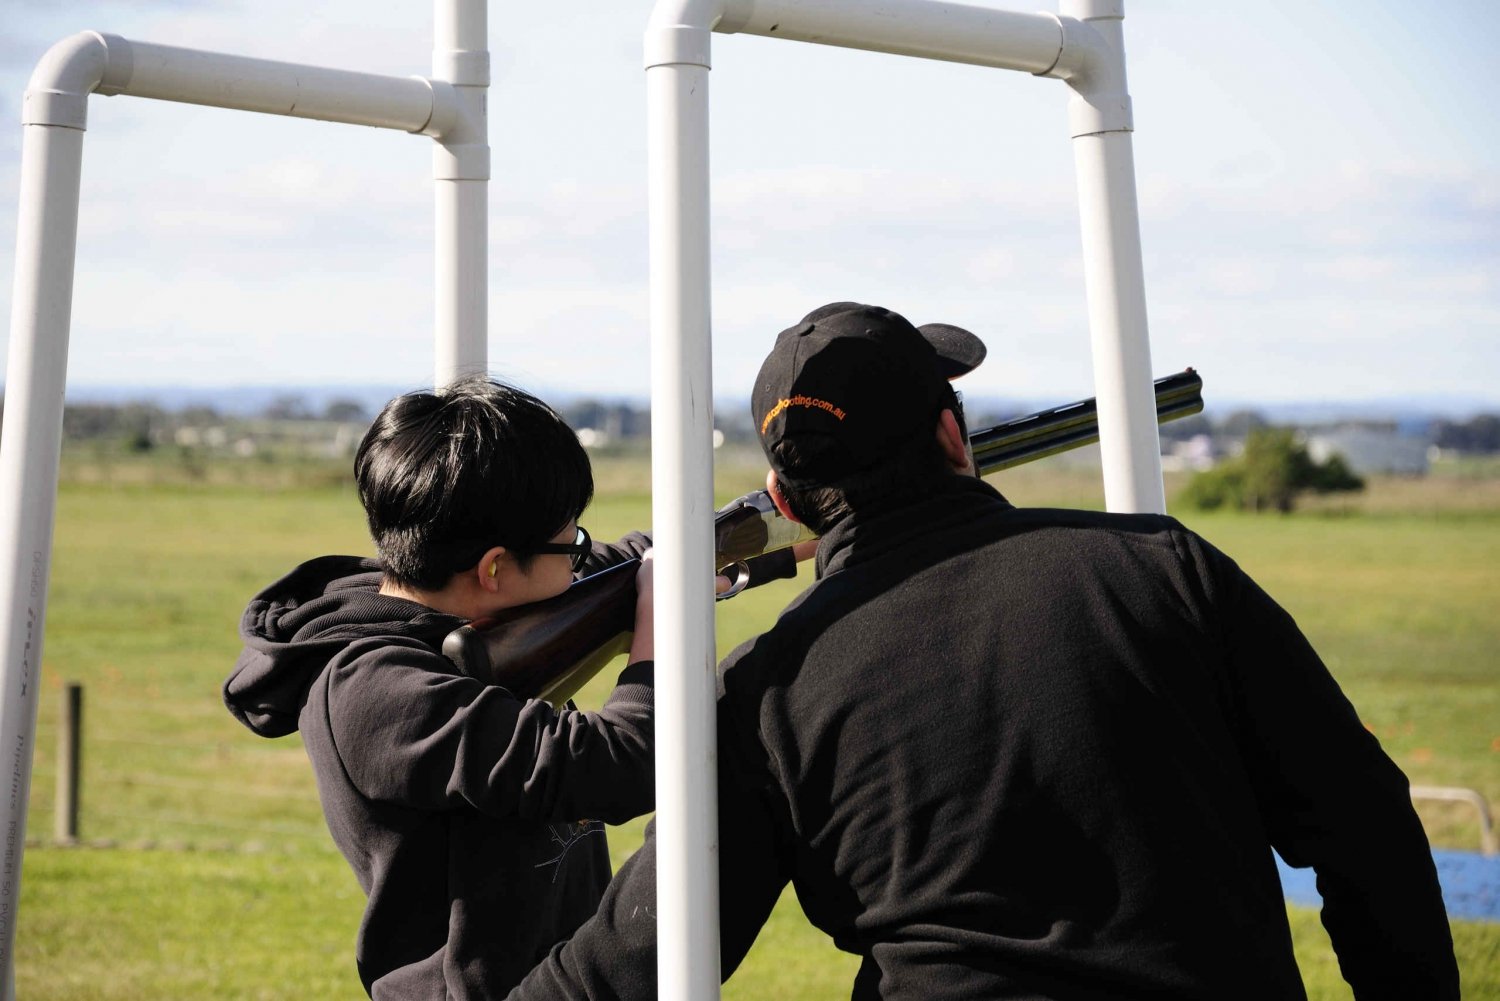 Melbourne Clay Target Shooting Experience